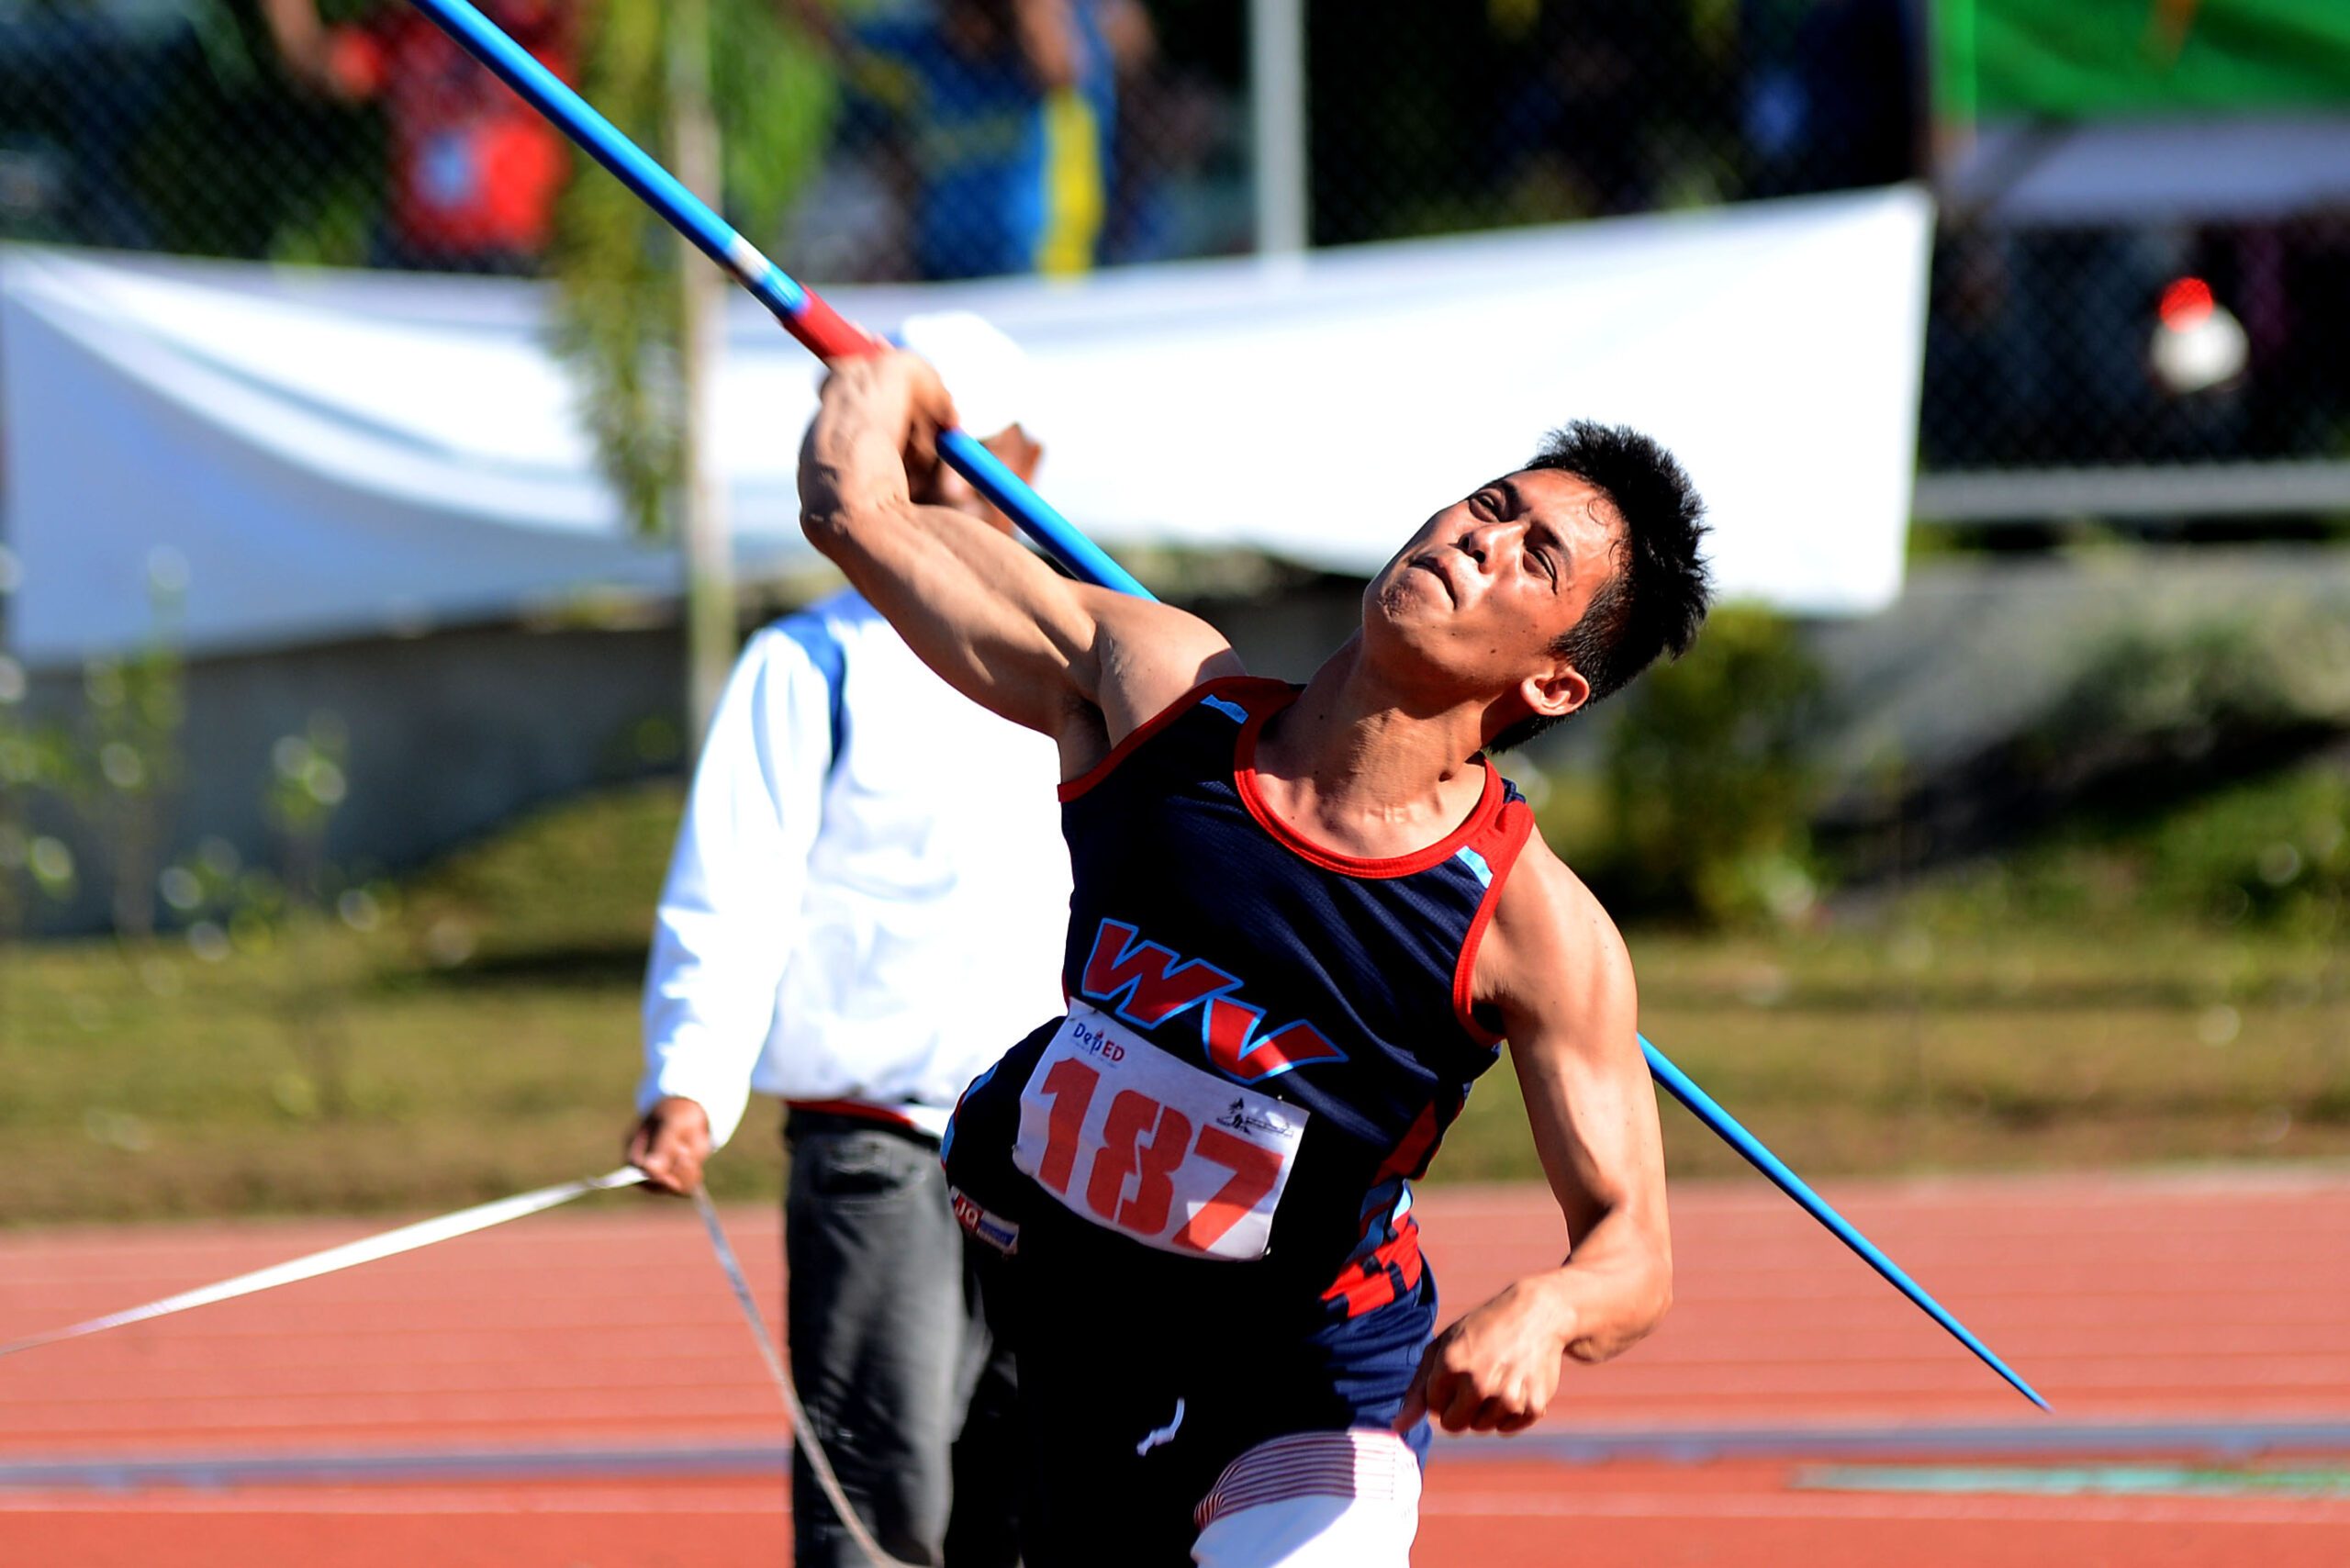 Defending champ NCR races to 7 golds on Day 1 of #Palaro2016